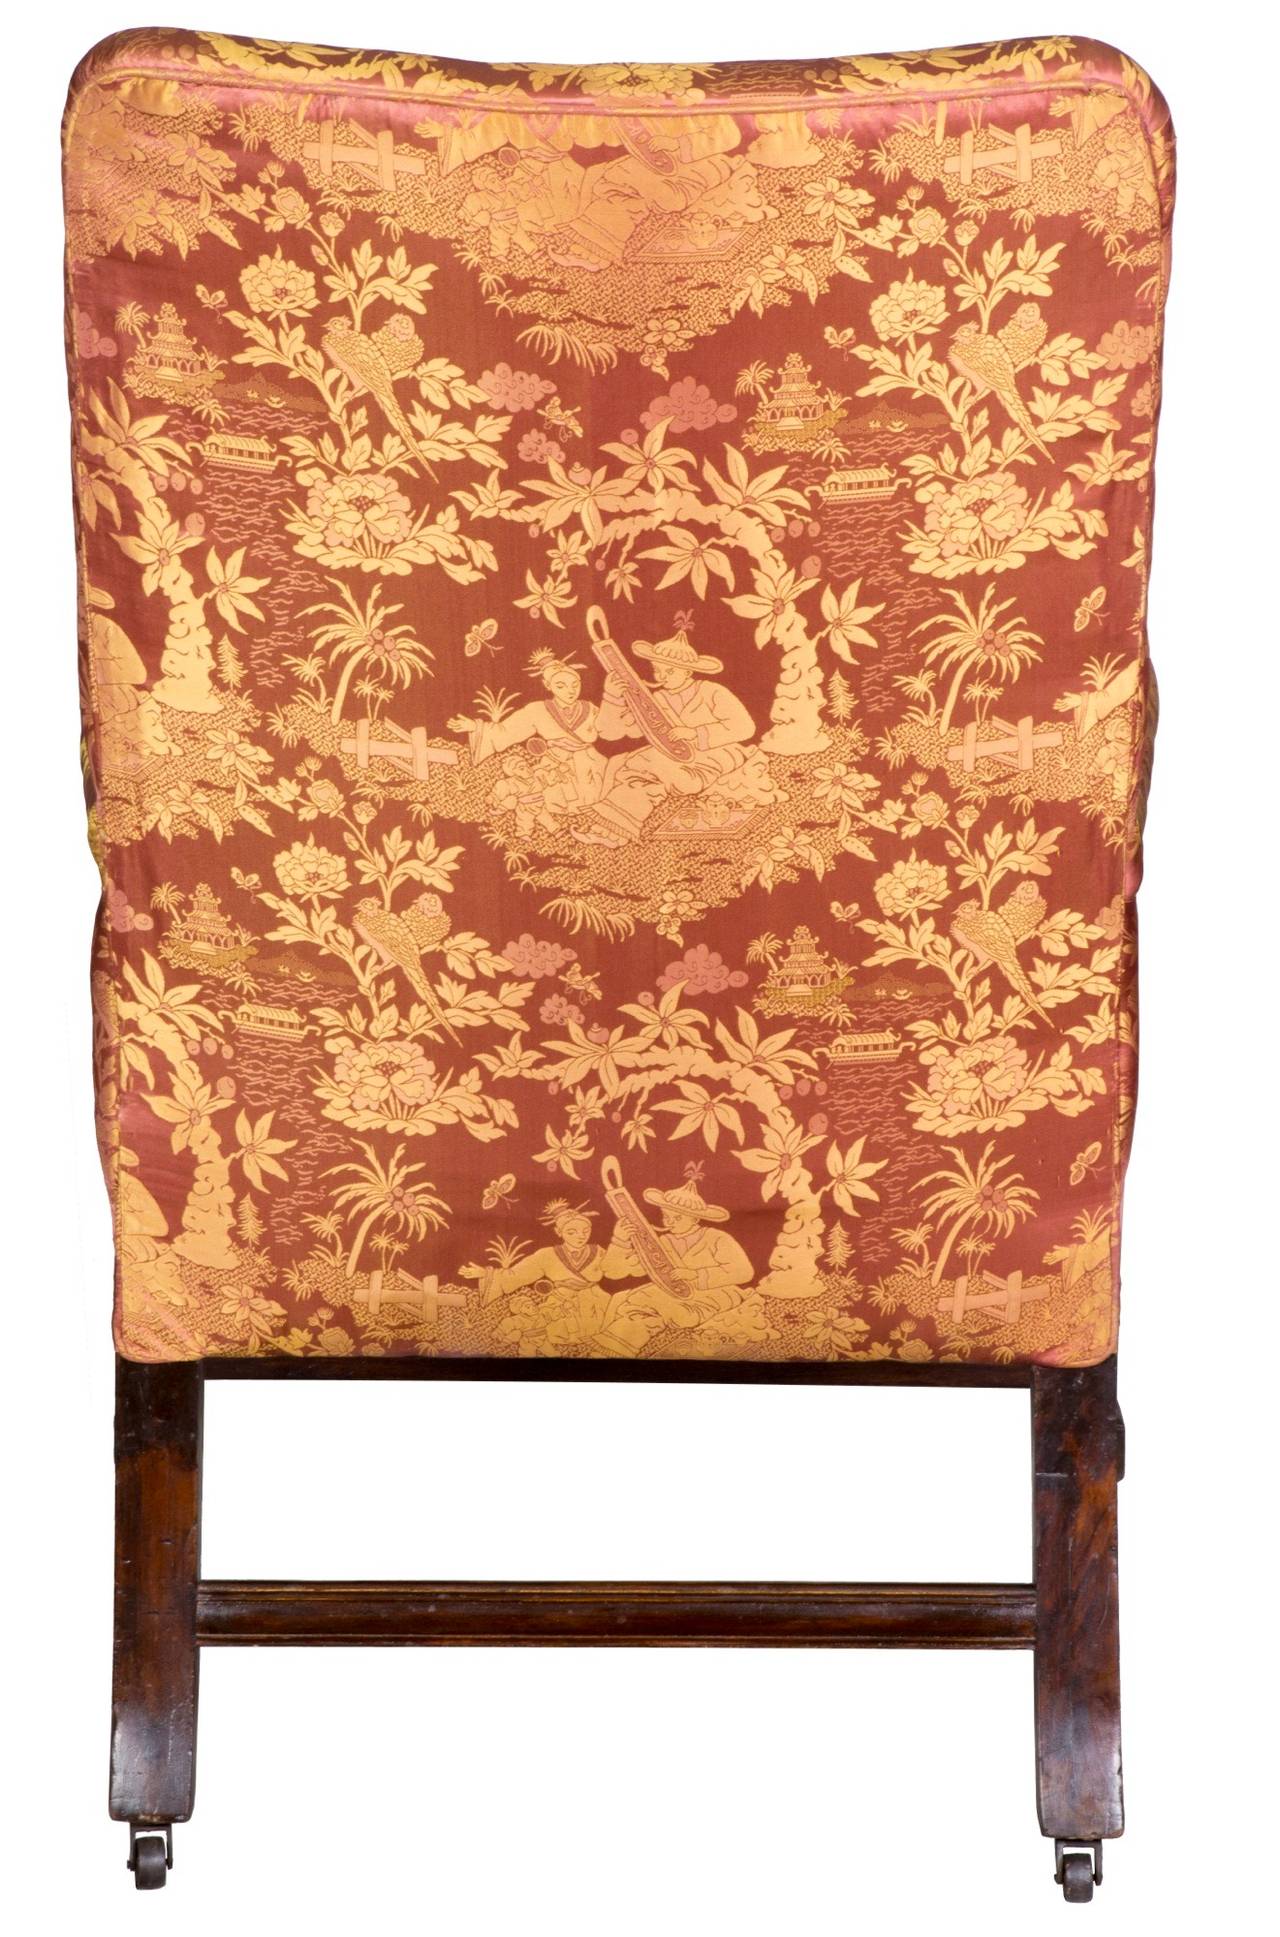 This is a good sized chair which is as comfortable as it looks. The arm supports are beautifully carved and detailed, as are the legs. The casters in the rear were added later--and the Marlboro foot at the bottom of the leg raised accordingly--all